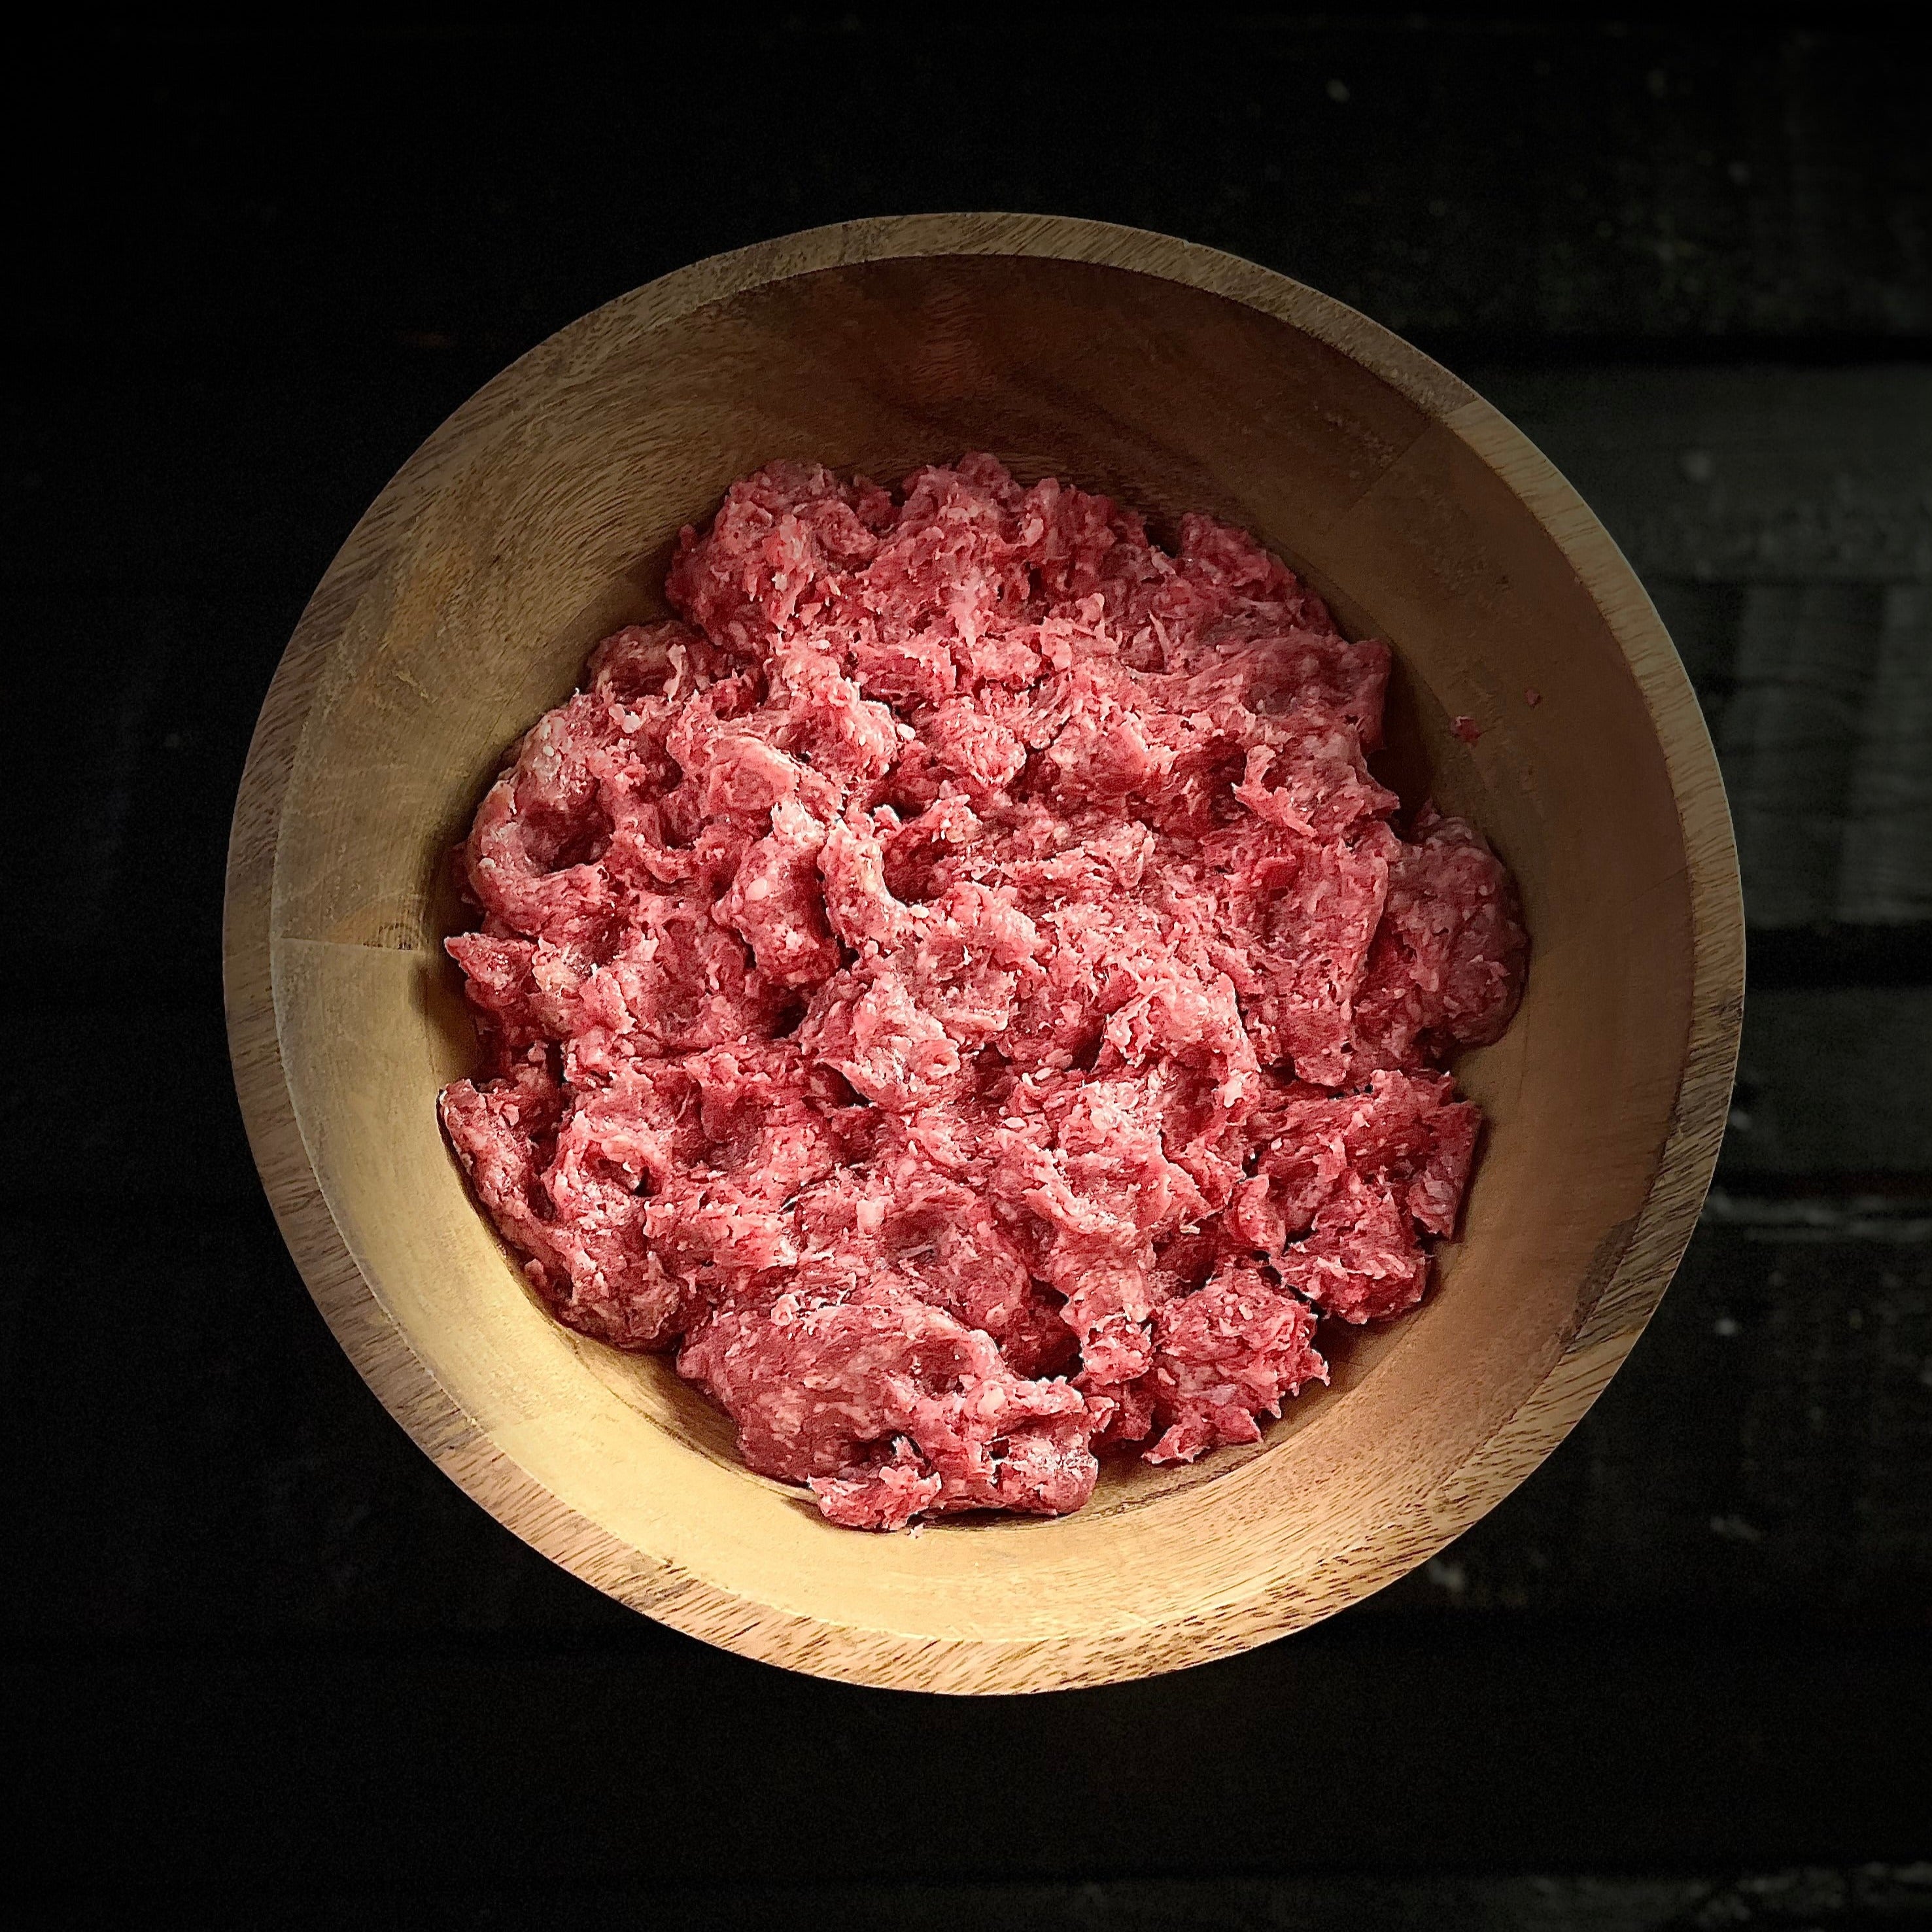 Raw ground beef spread out in wood bowl on slab